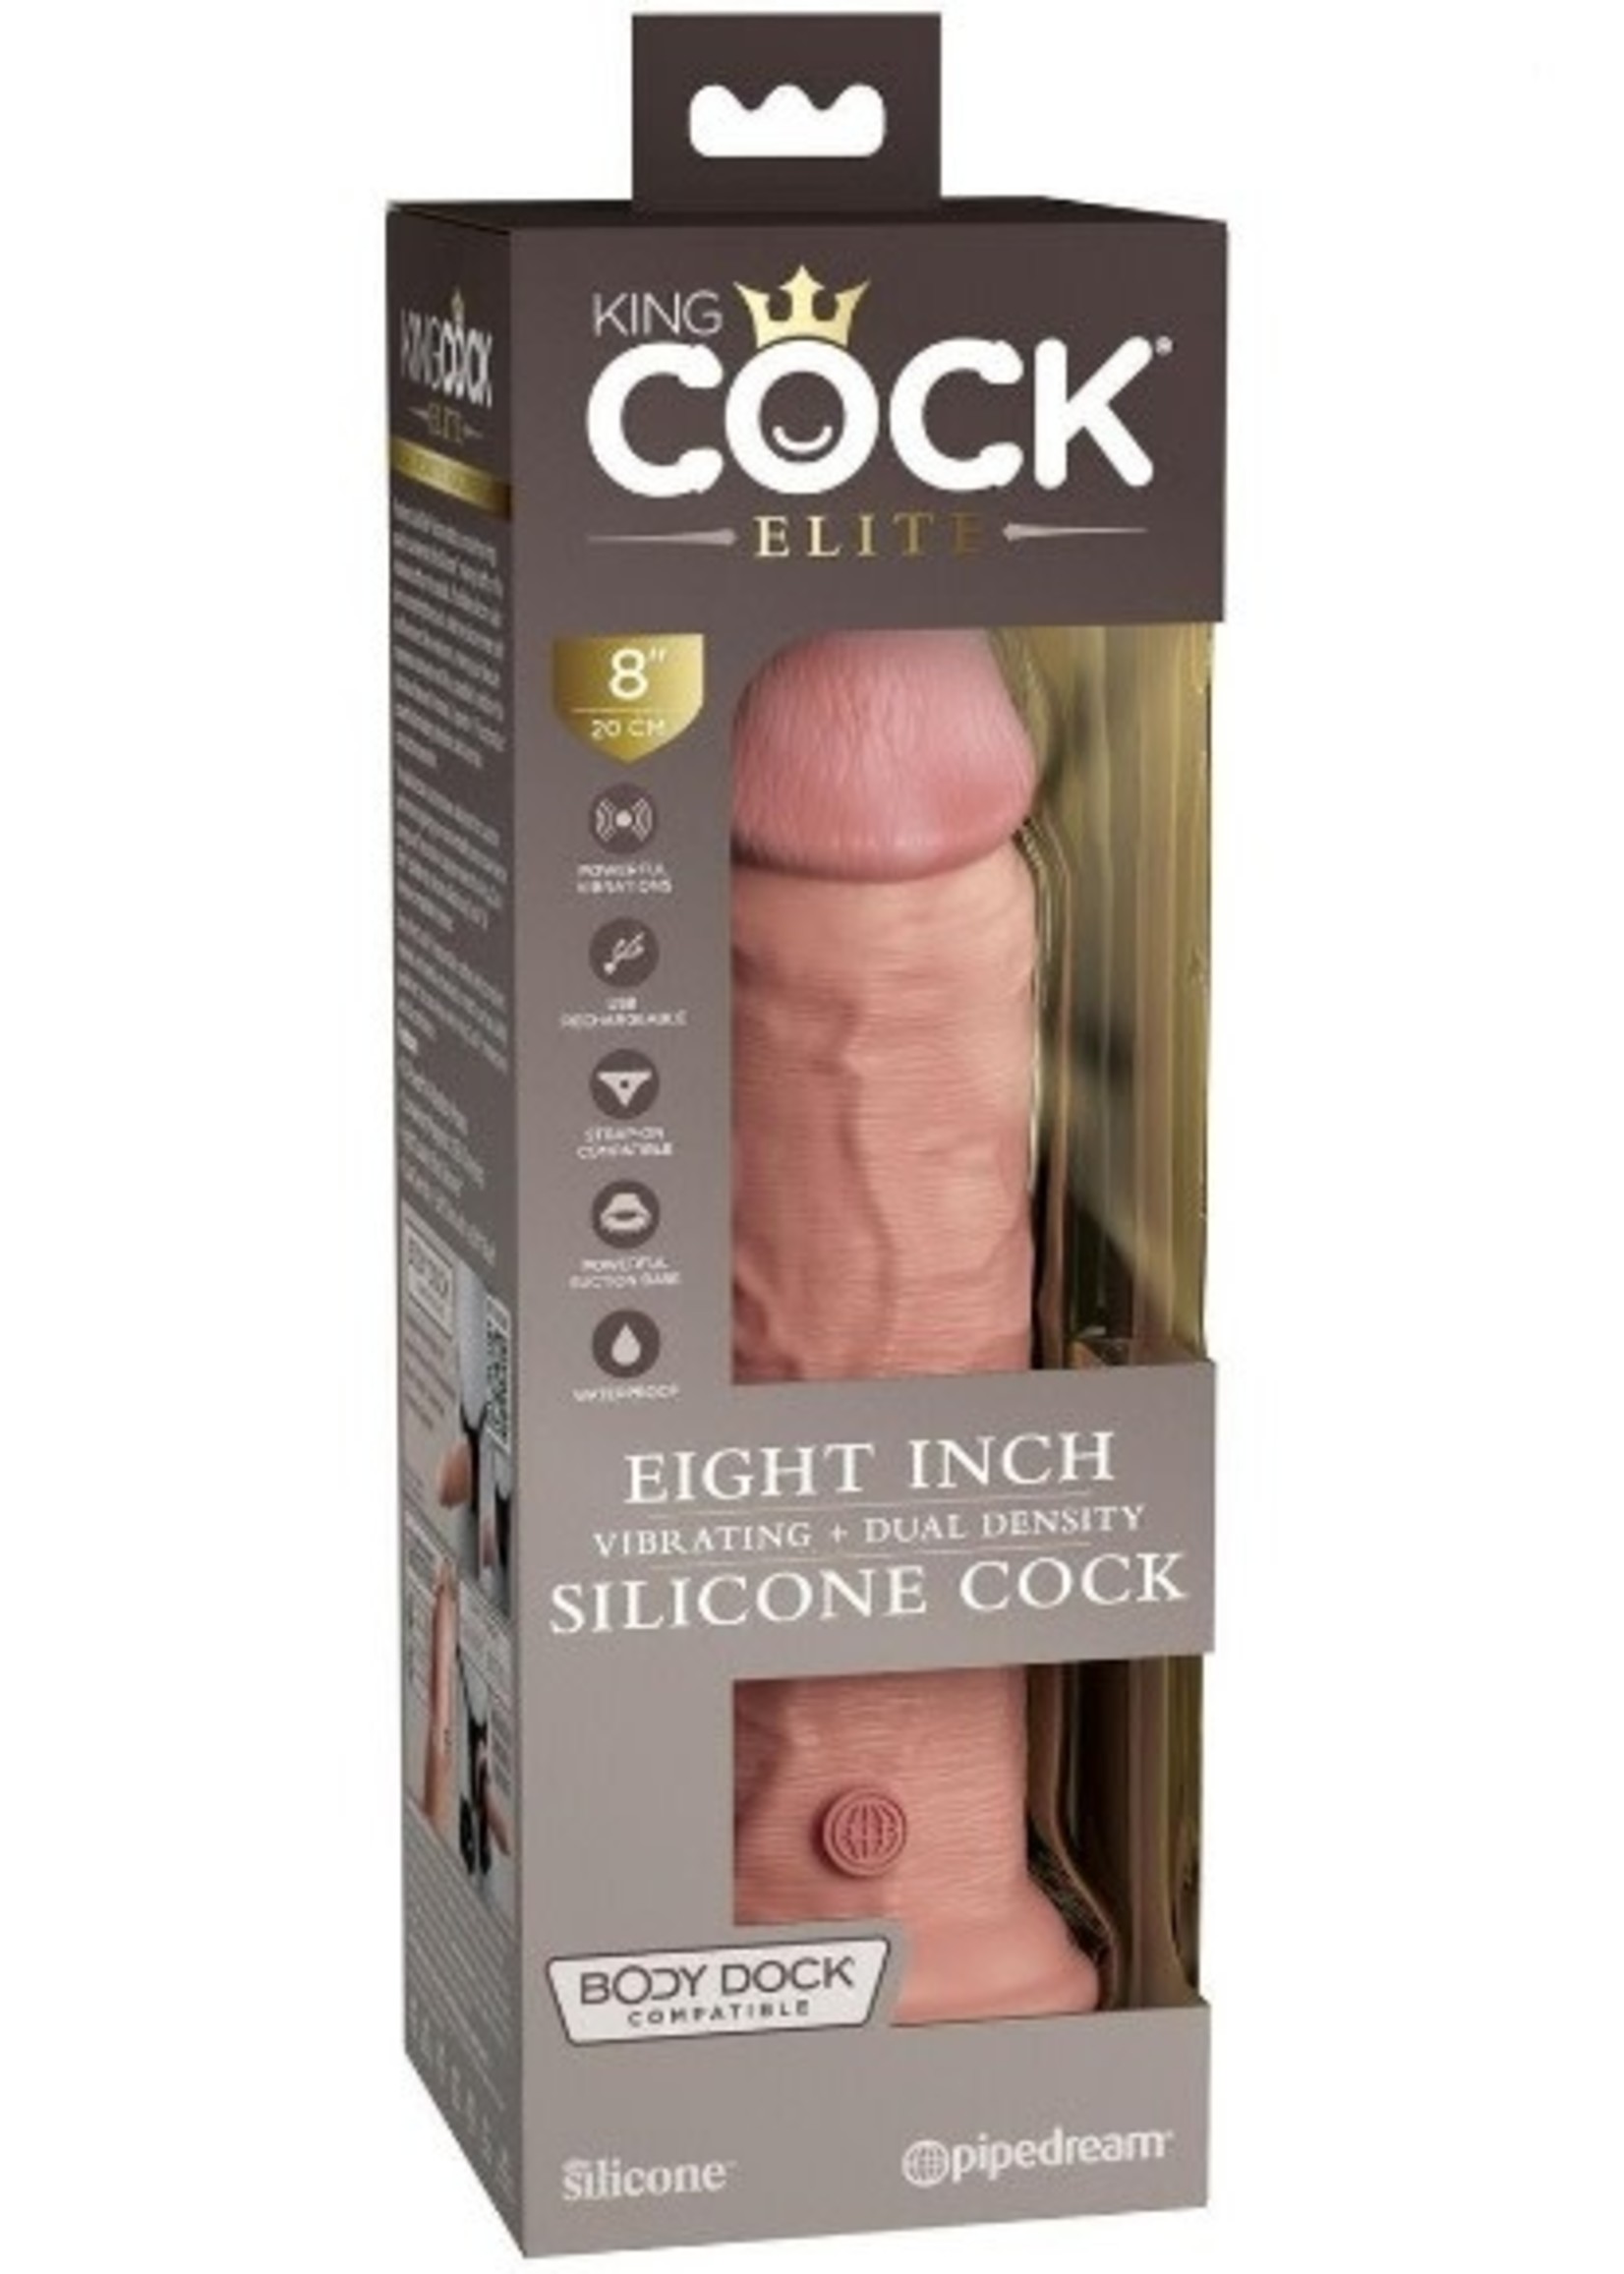 King Cock Elite Dual Density Vibrating Rechargeable Silicone Dildo 8in - Vanilla